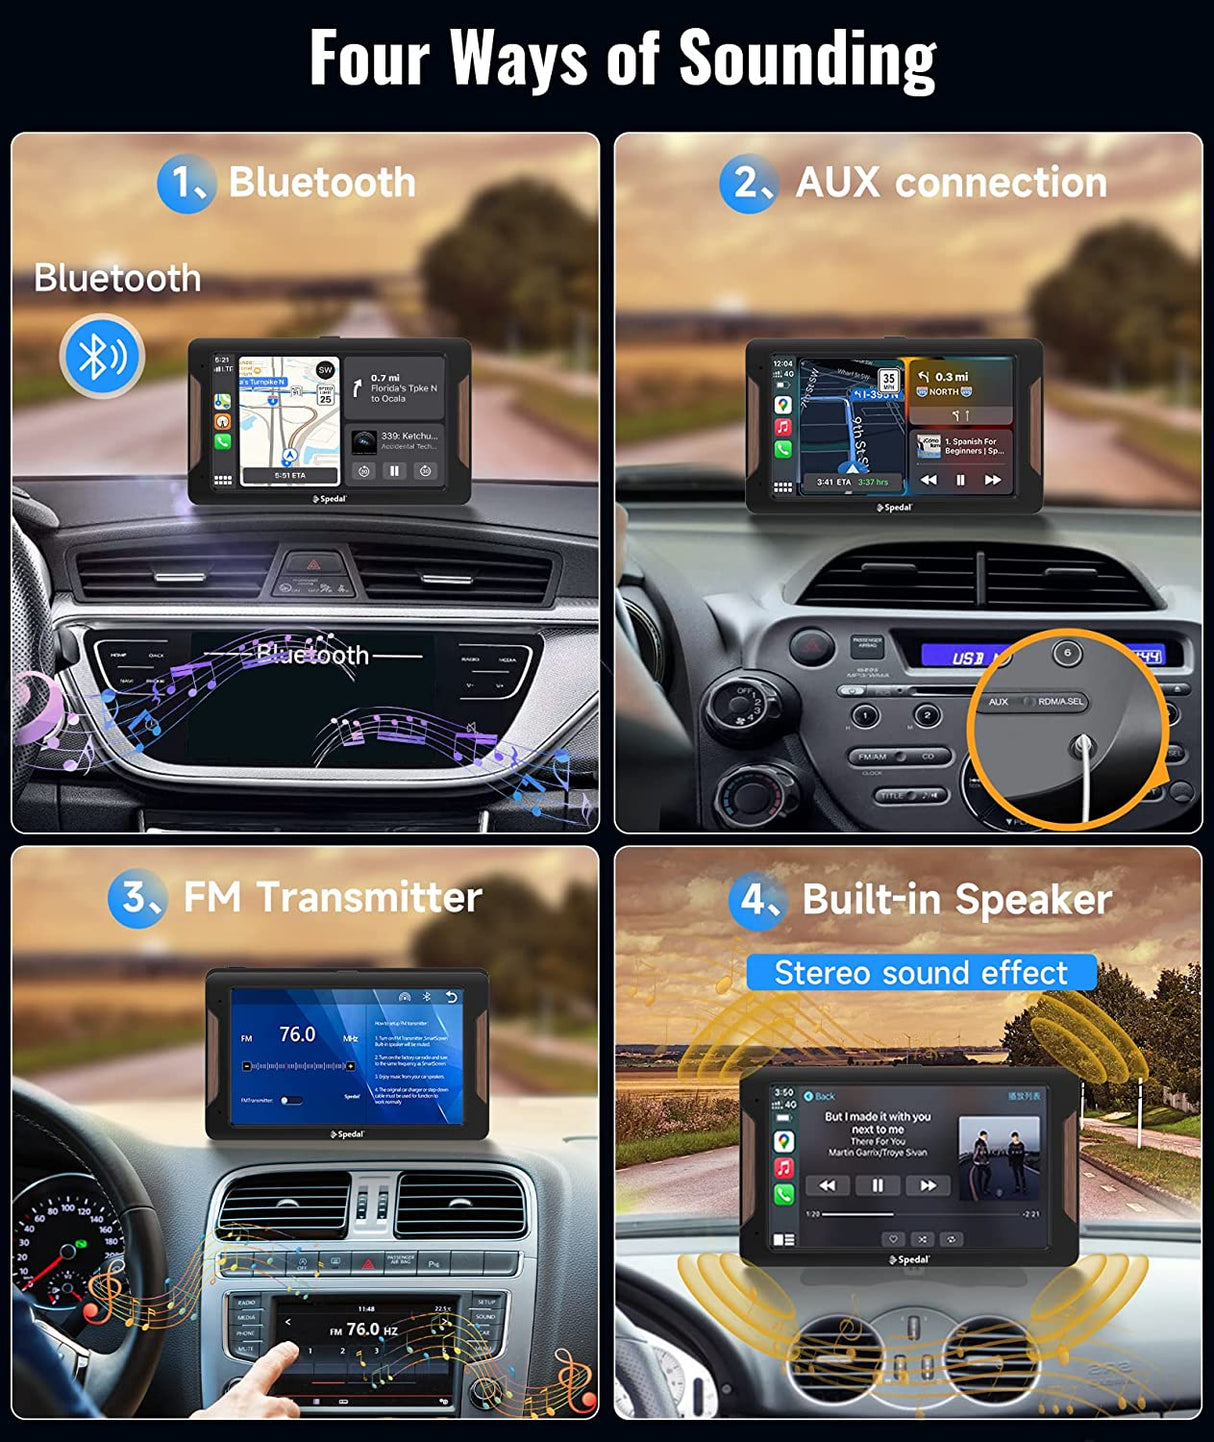 Here are the cars in the Philippines that support Android Auto